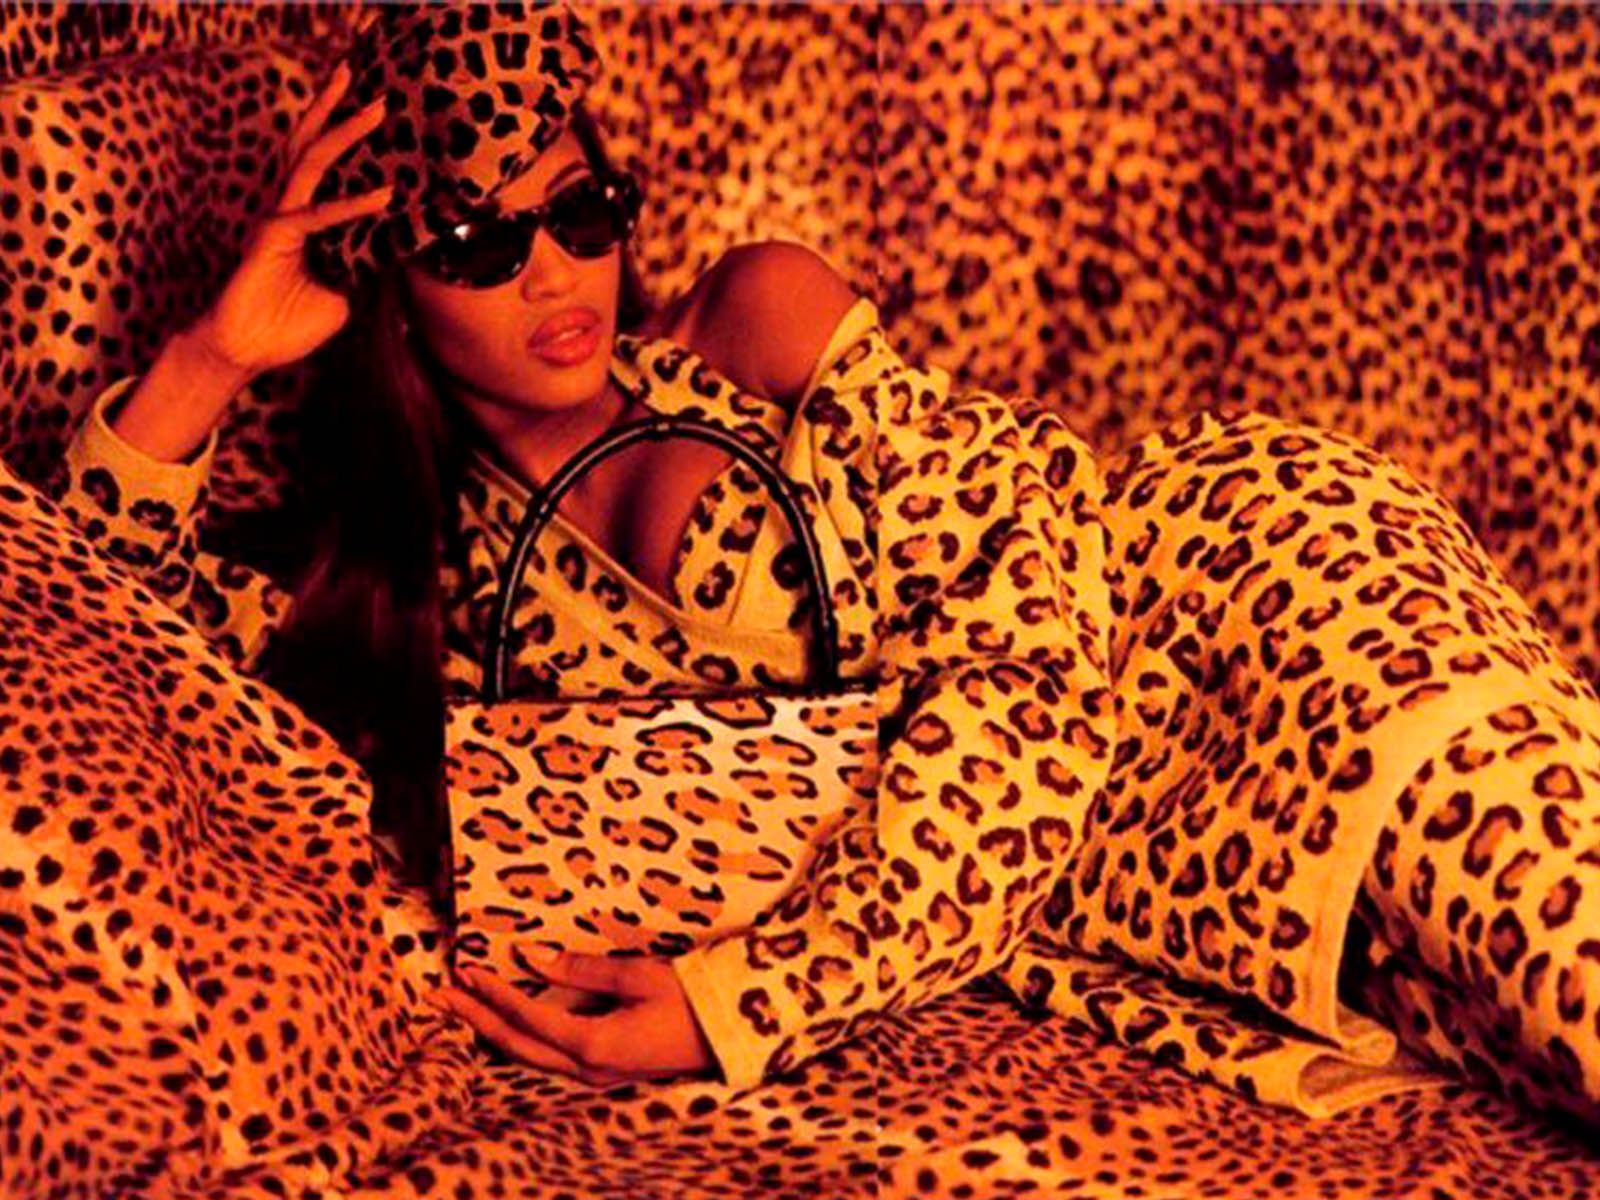 Animal print: the print that always comes back